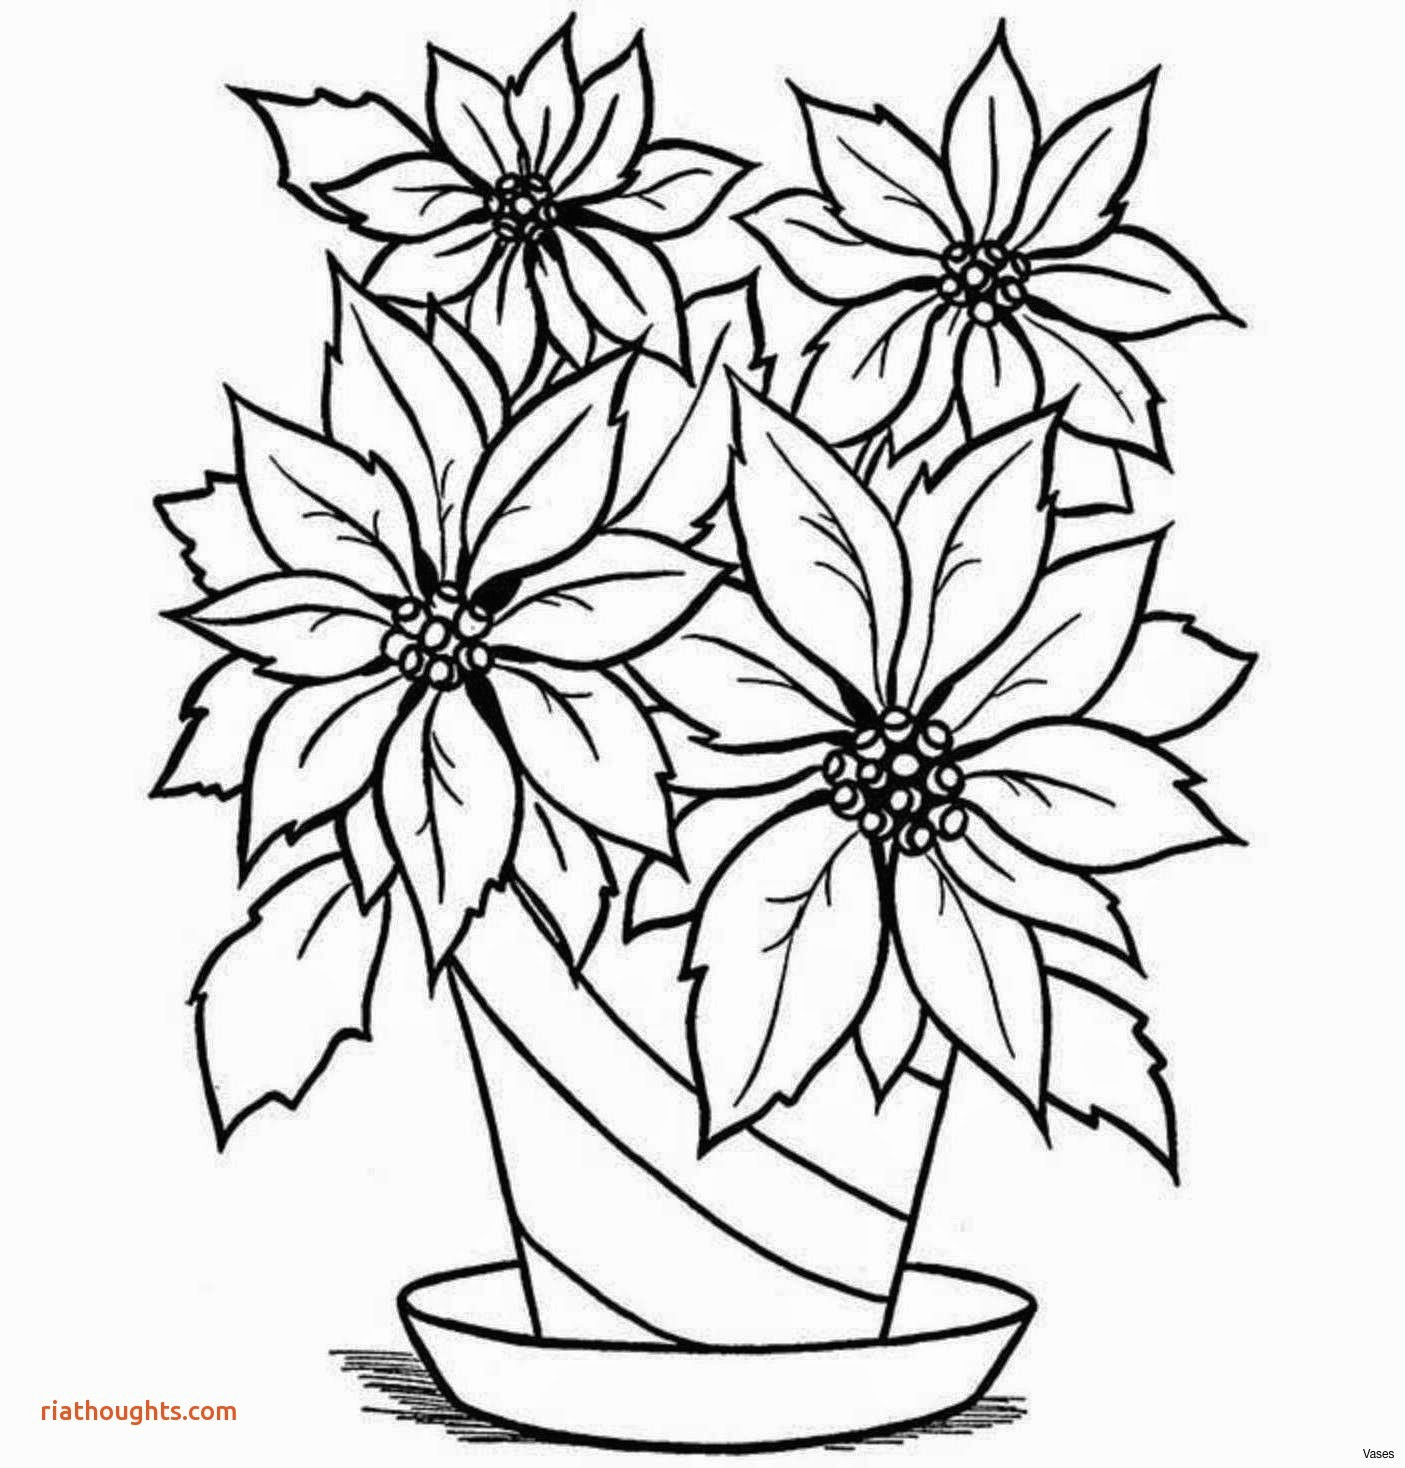 Drawing Pictures Of Flowers that are Easy Elegant Cool Drawings for Kids Step by Step Www Pantry Magic Com